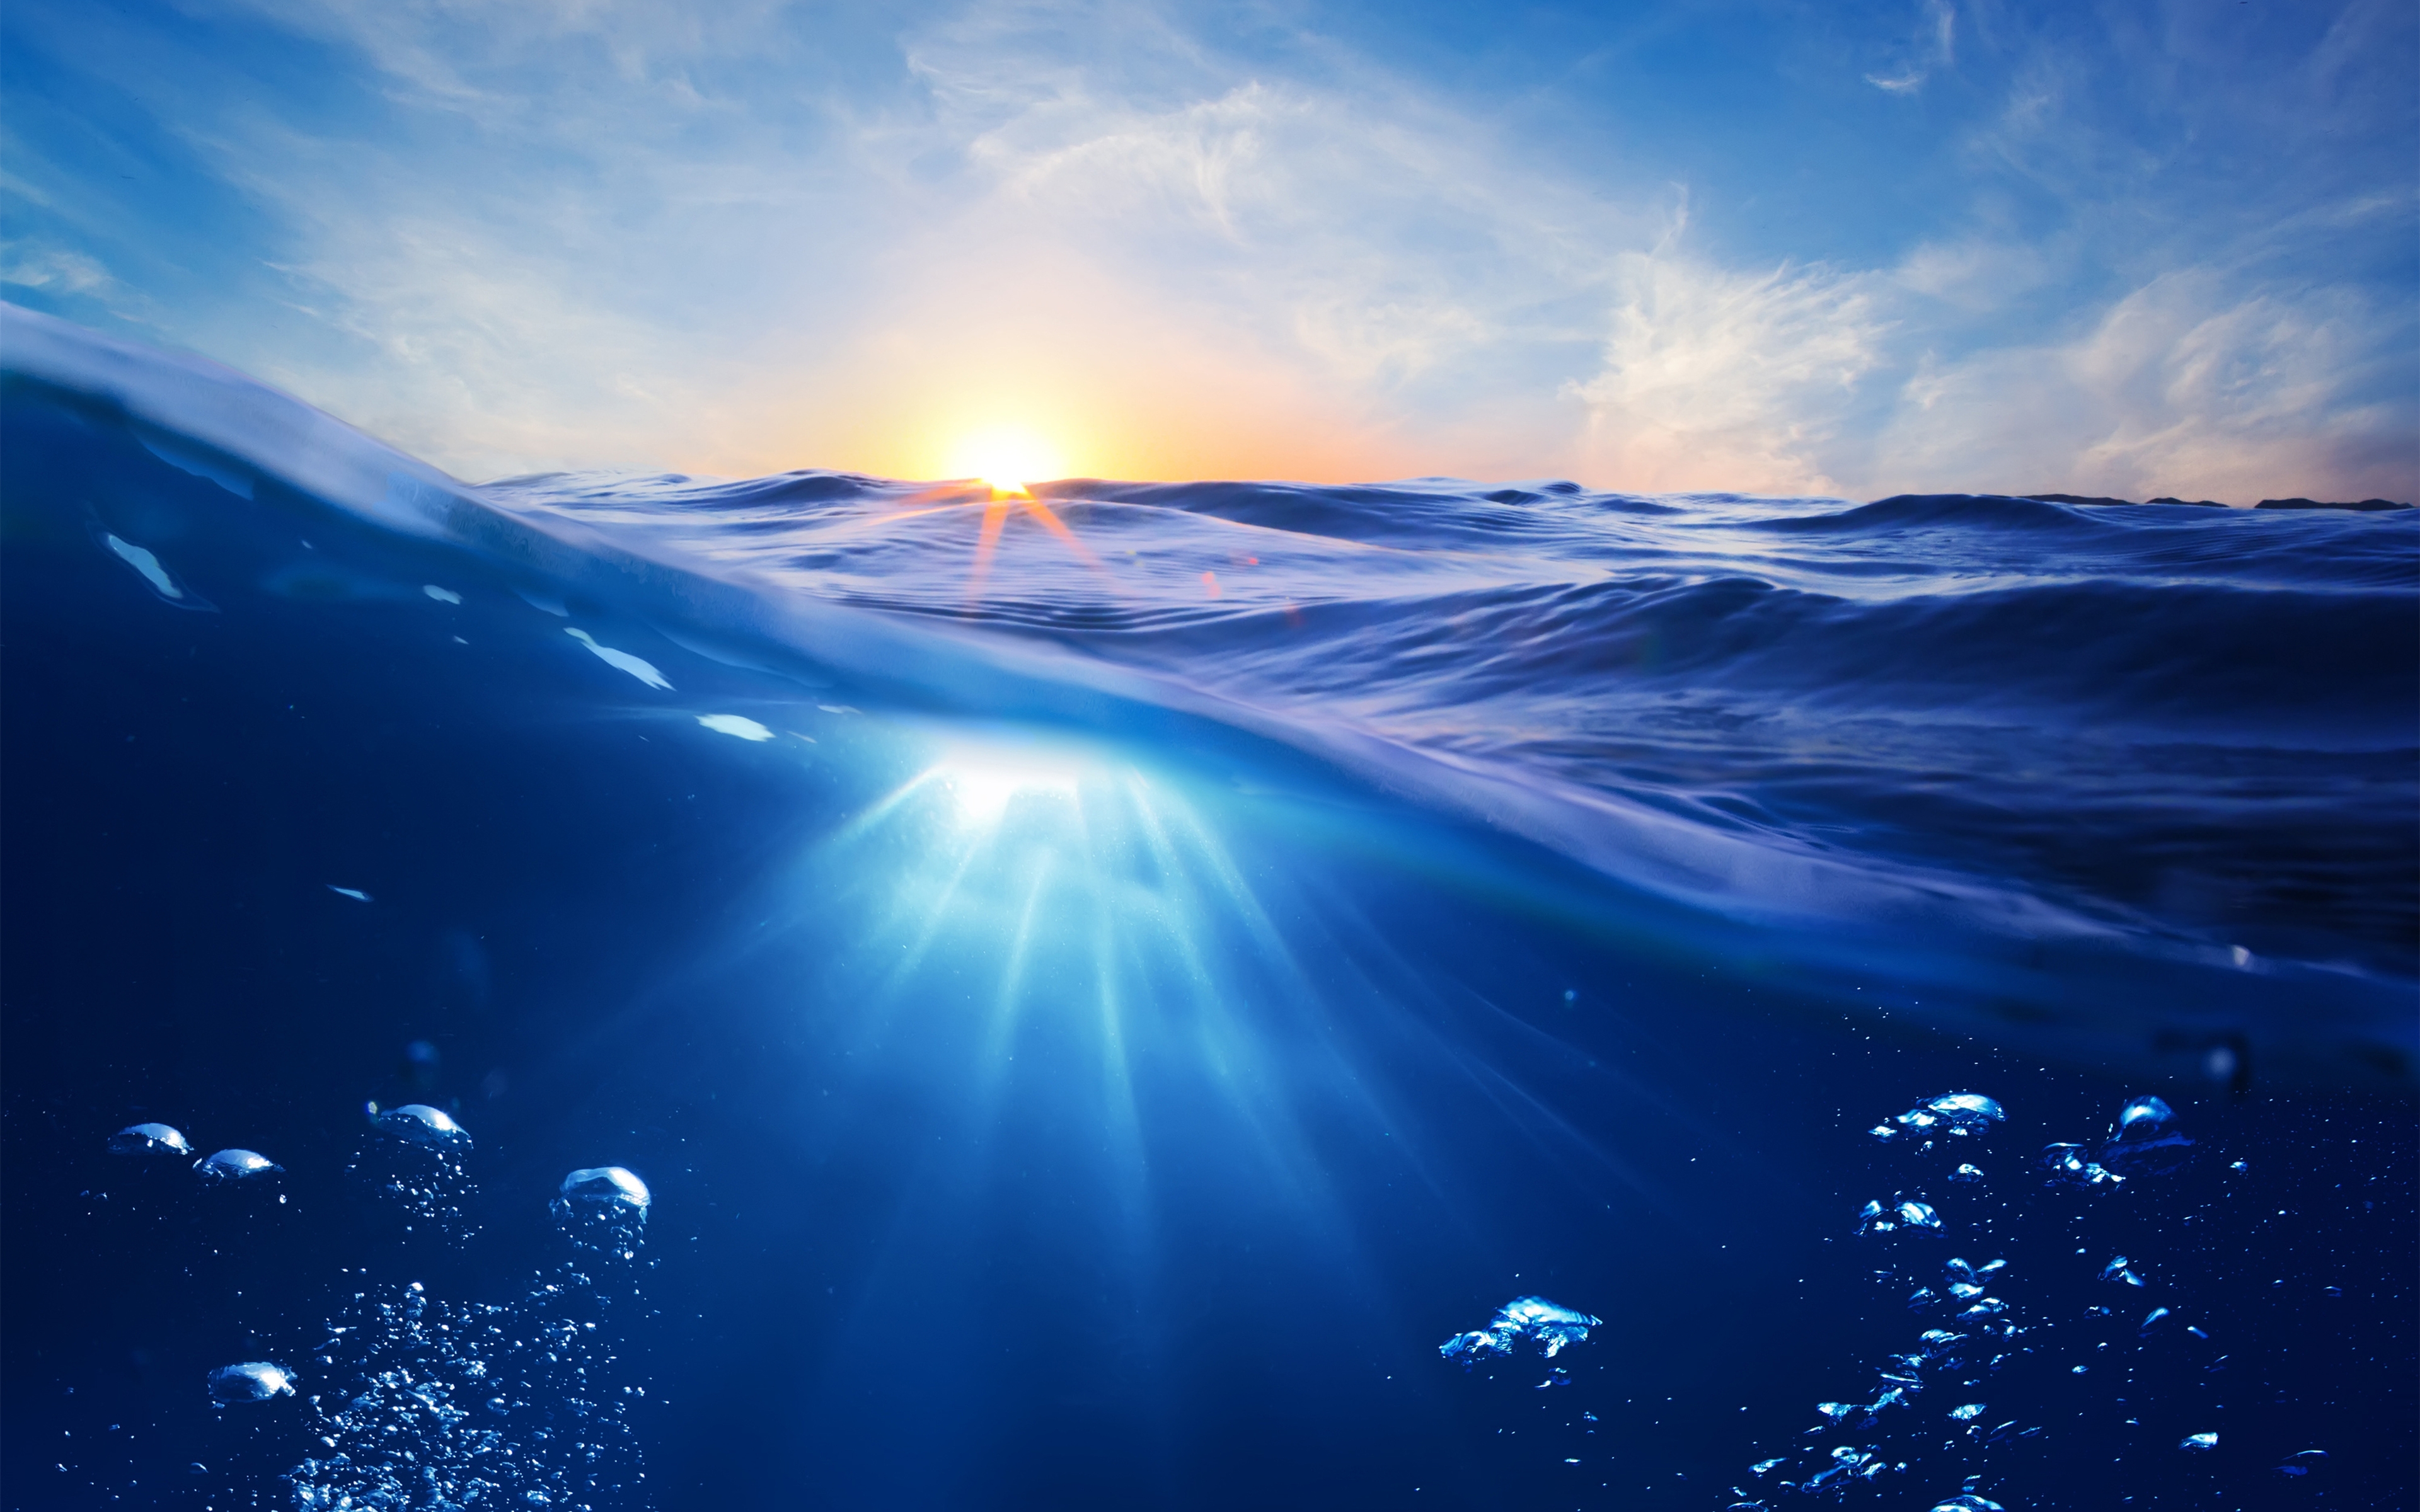 Image: Water, bubbles, sky, sun rays